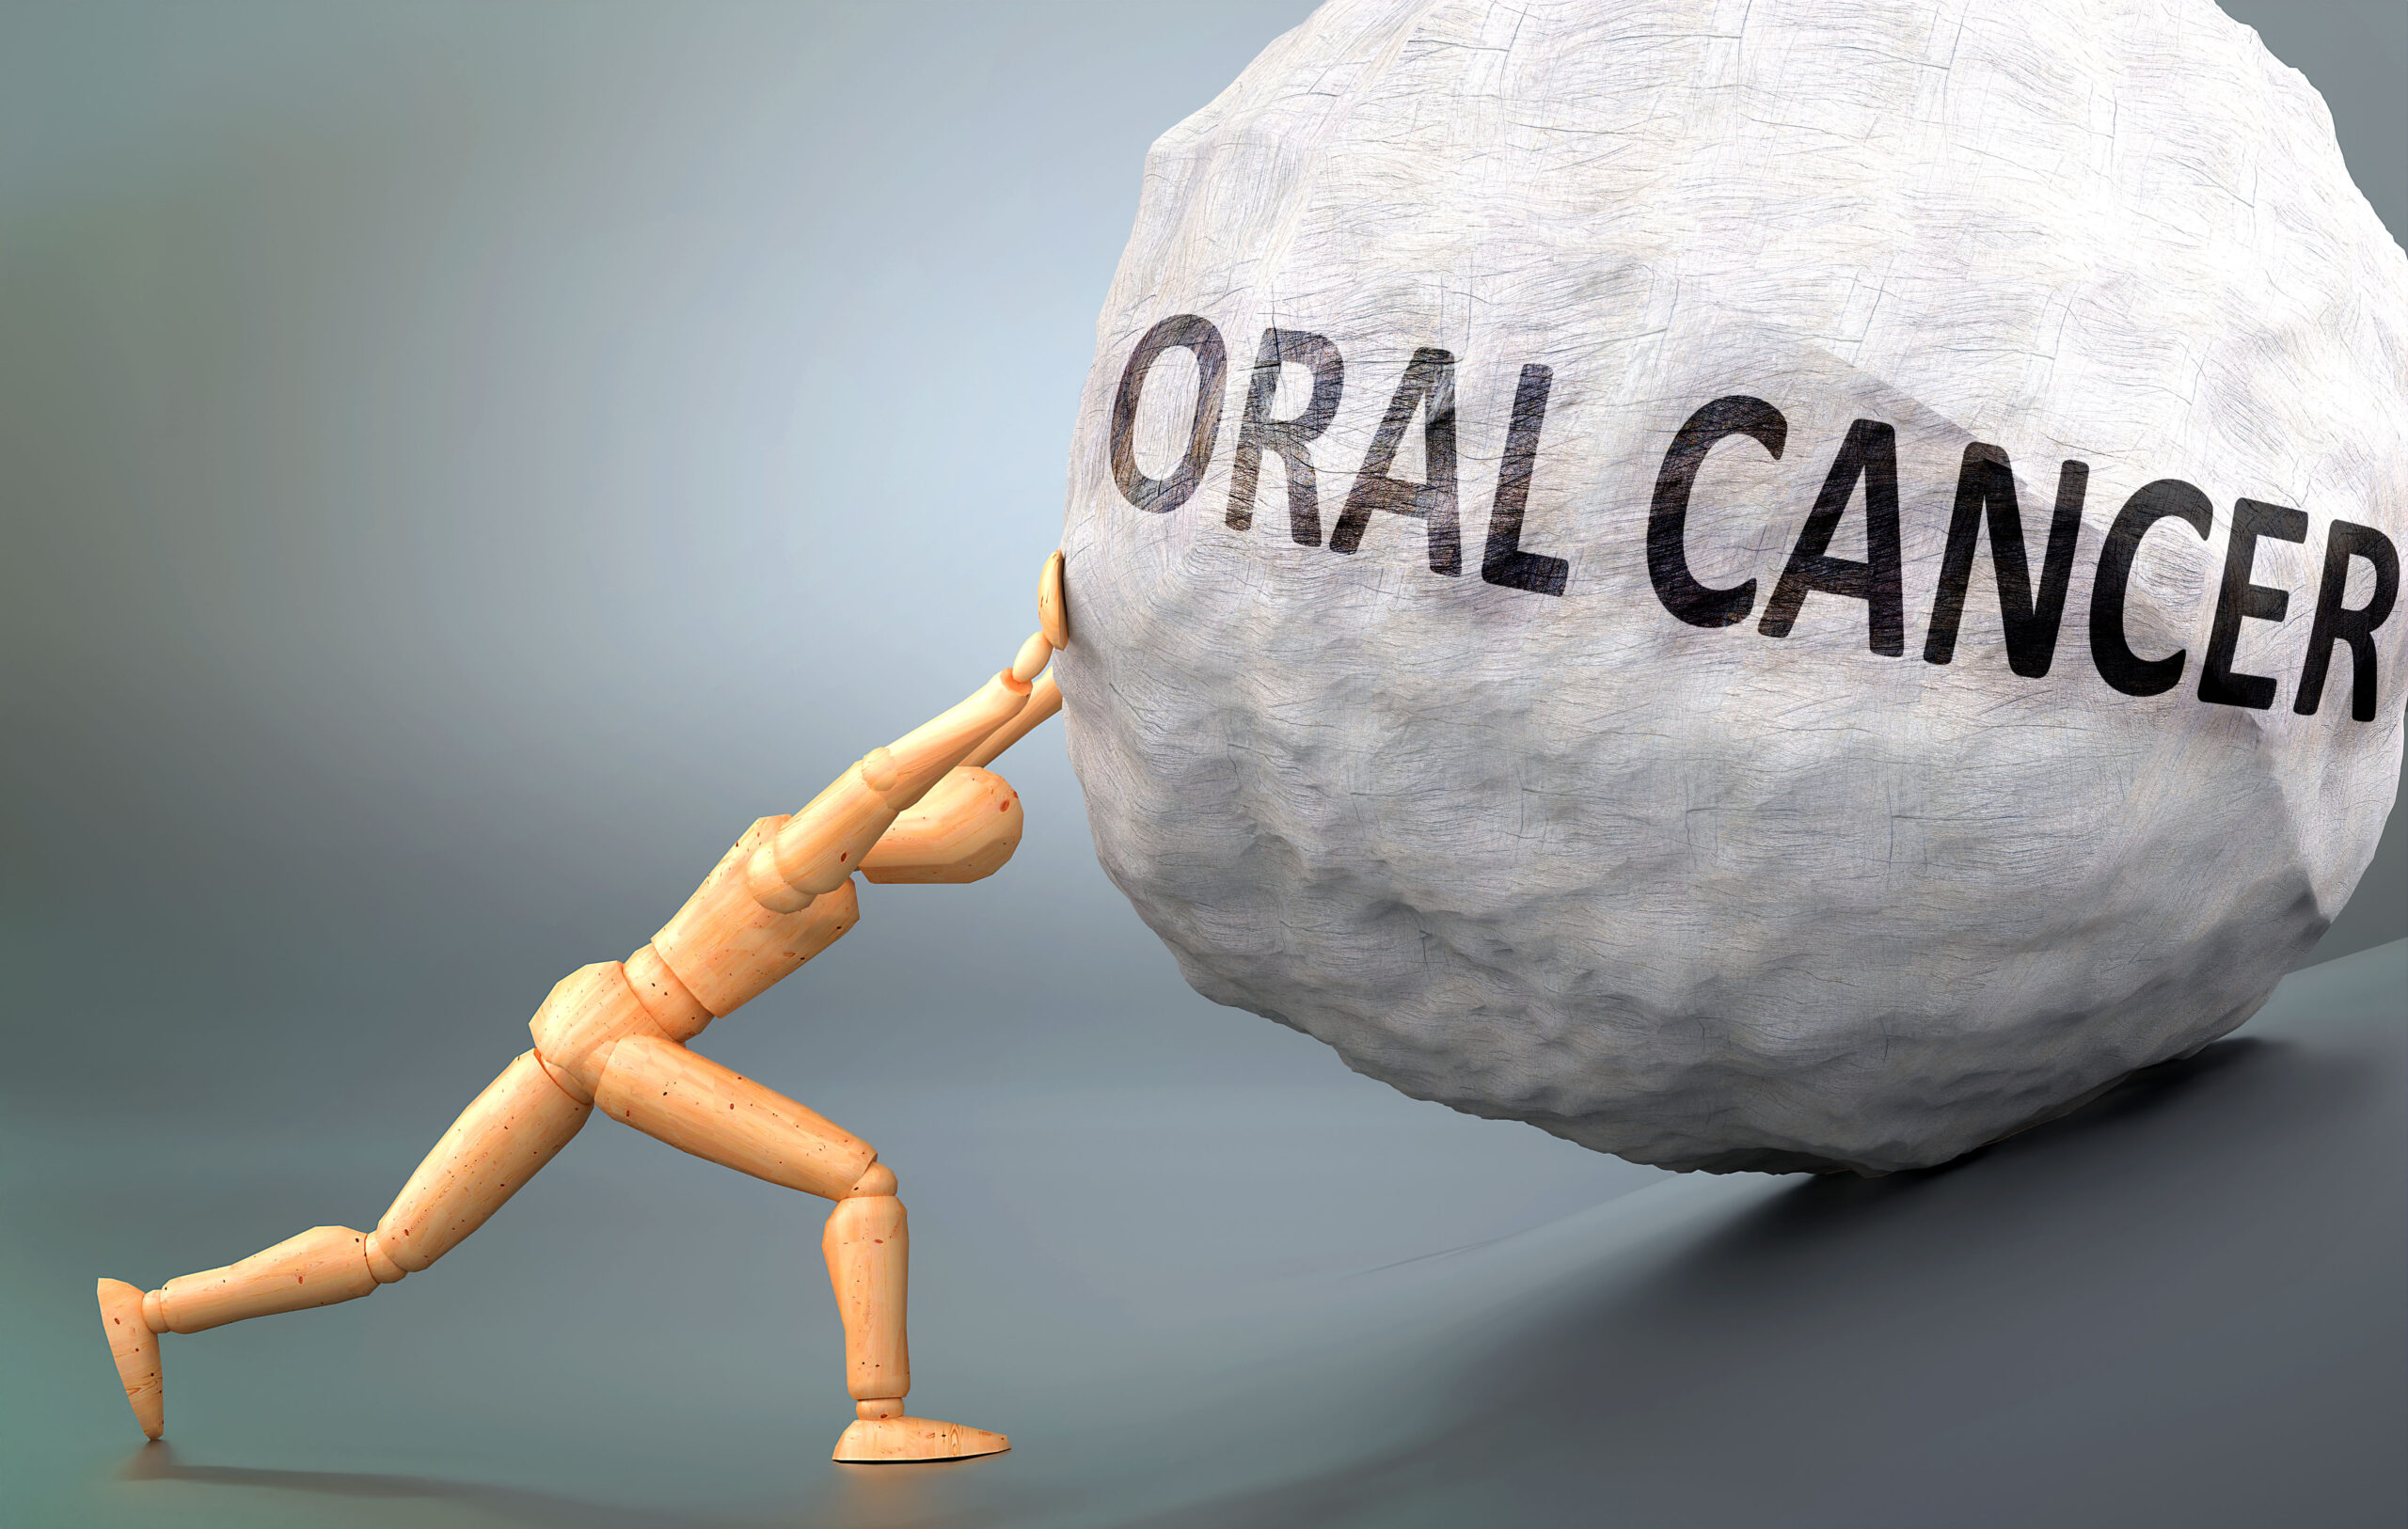 Oral cancer - depiction, impression and presentation of this condition shown a wooden model pushing heavy weight to symbolize struggle and pain when dealing with Oral cancer, 3d illustration.